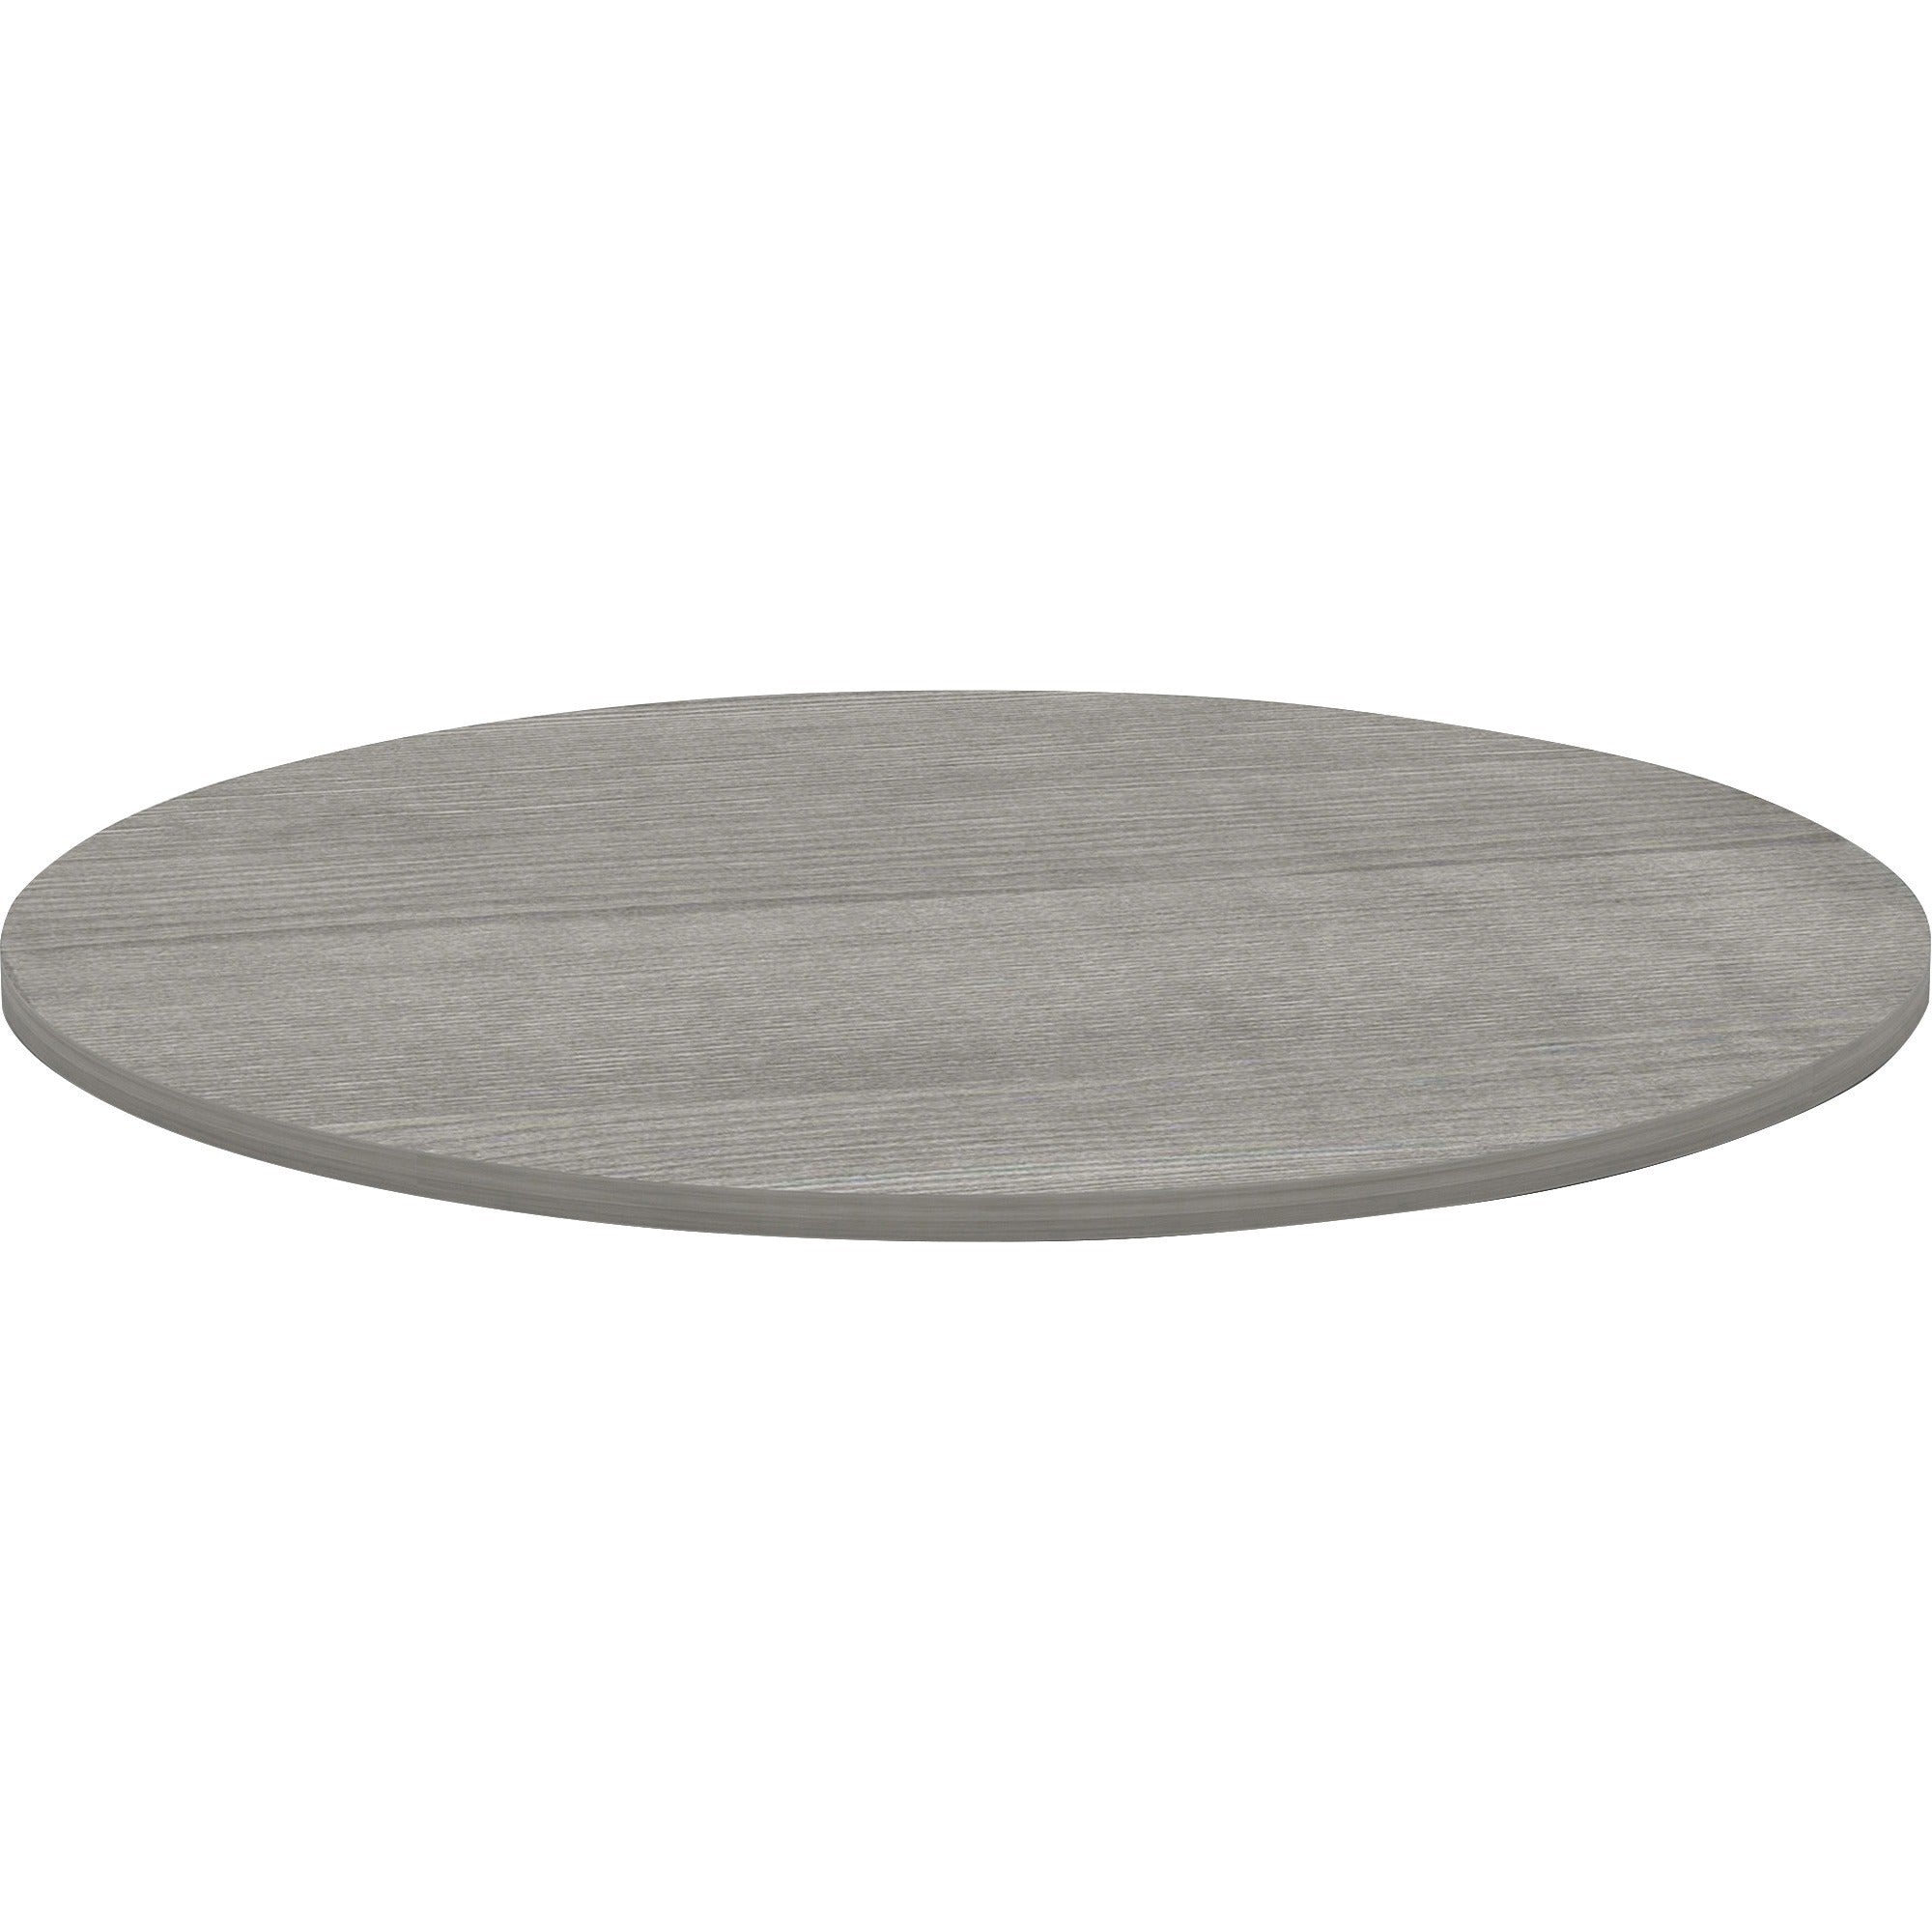 lorell-essentials-conference-tabletop-for-table-topweathered-charcoal-laminate-round-top-contemporary-style-x-1-table-top-thickness-x-48-table-top-diameter-assembly-required-1-each_llr69588 - 1